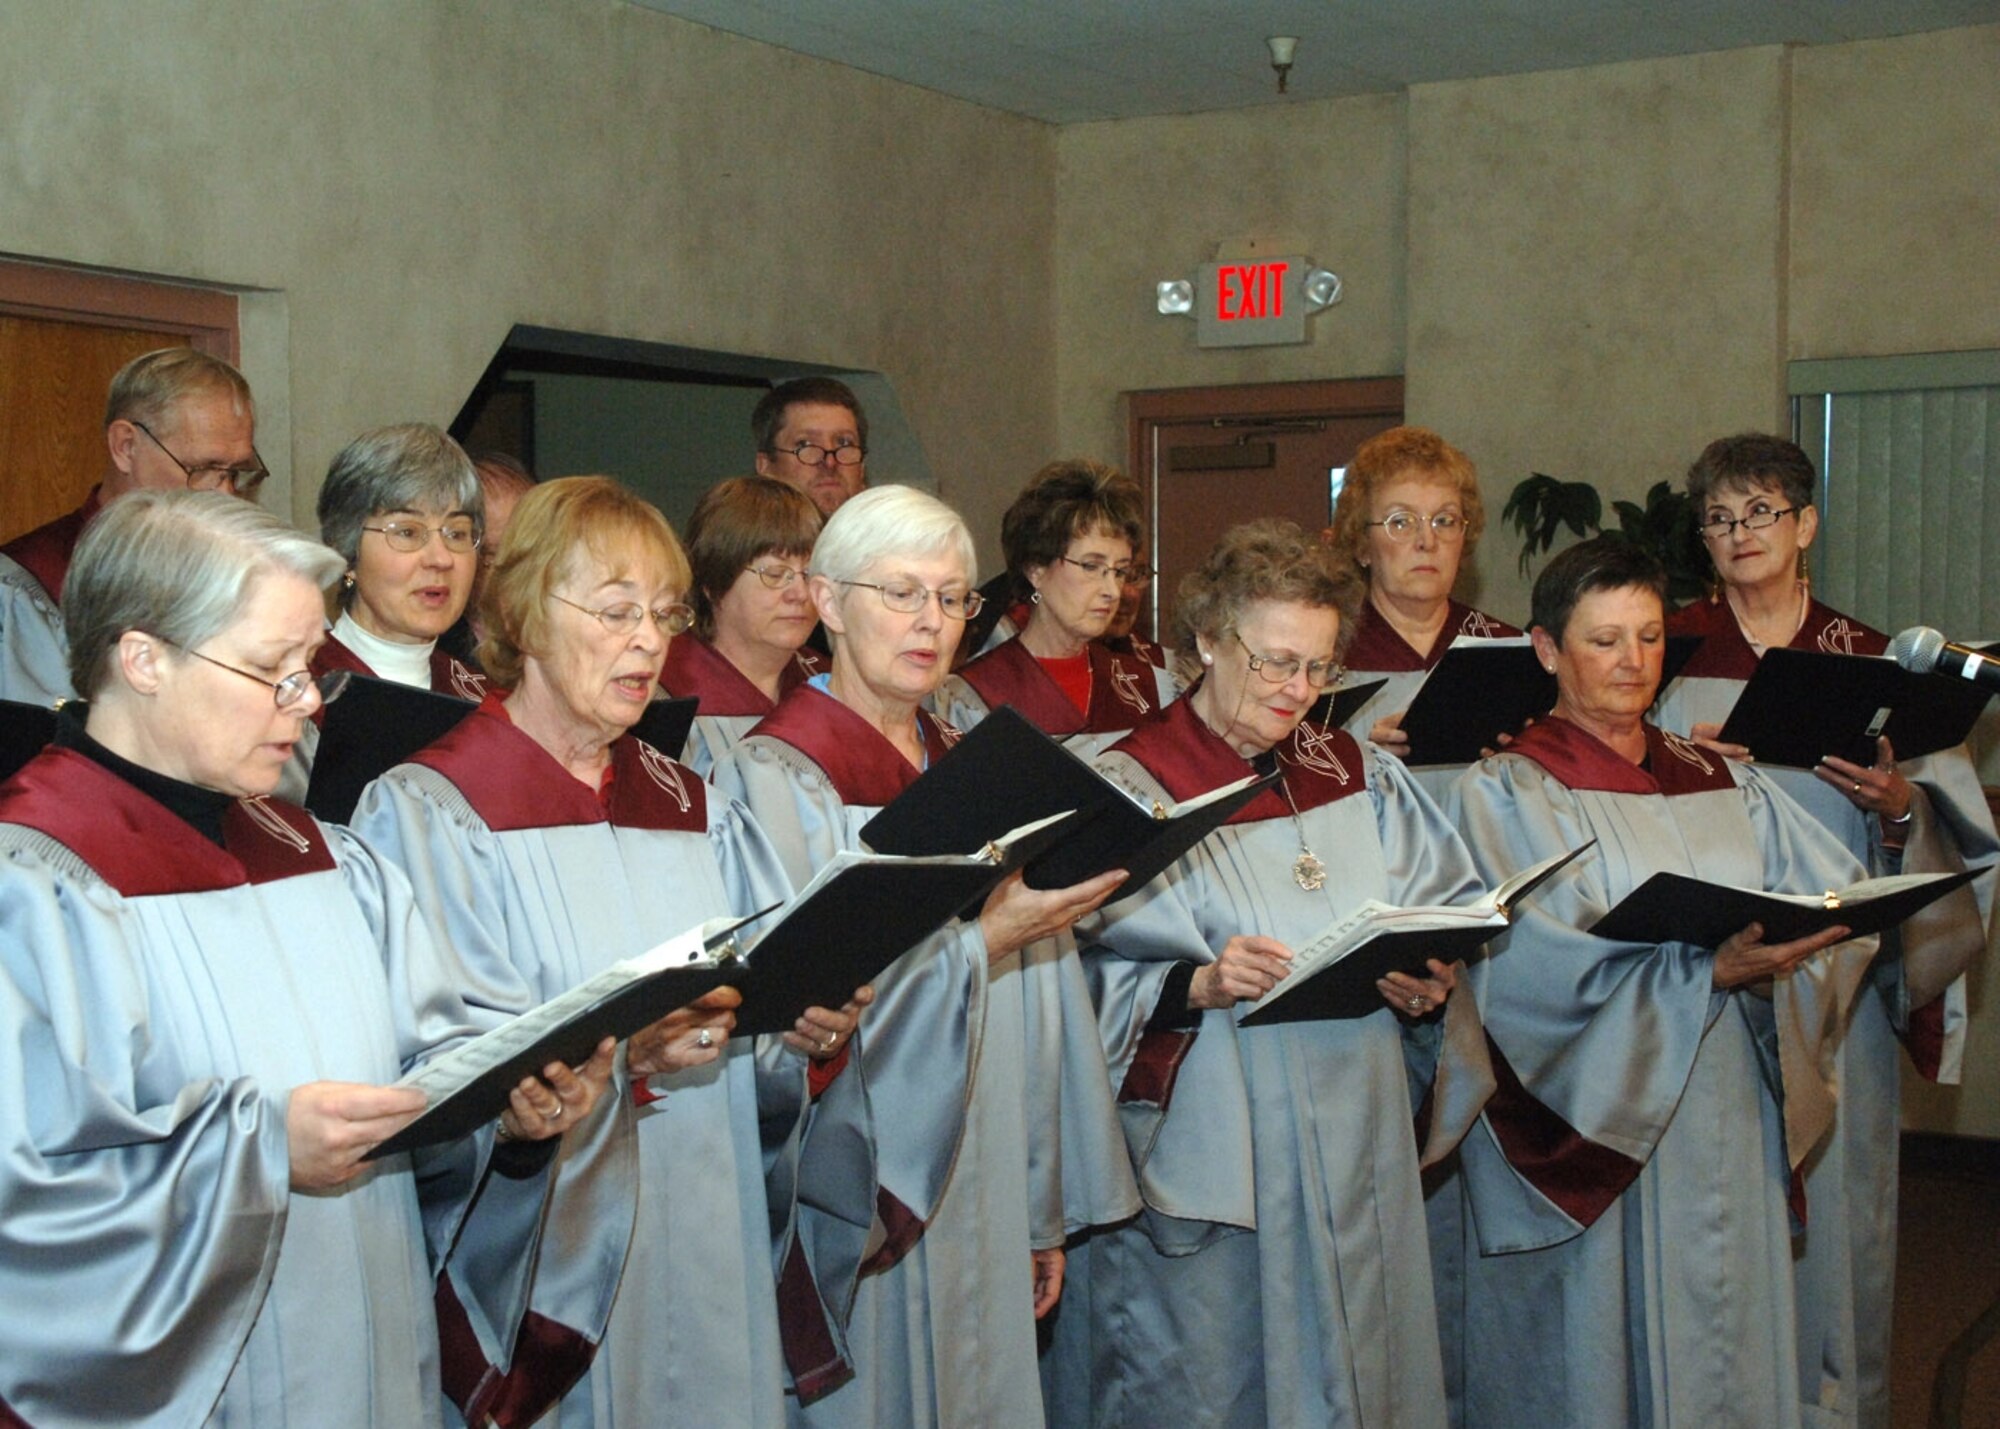 The Chancel Choir leads the audience in song during the National Prayer Breakfast Tuesday at the Base Chapel.